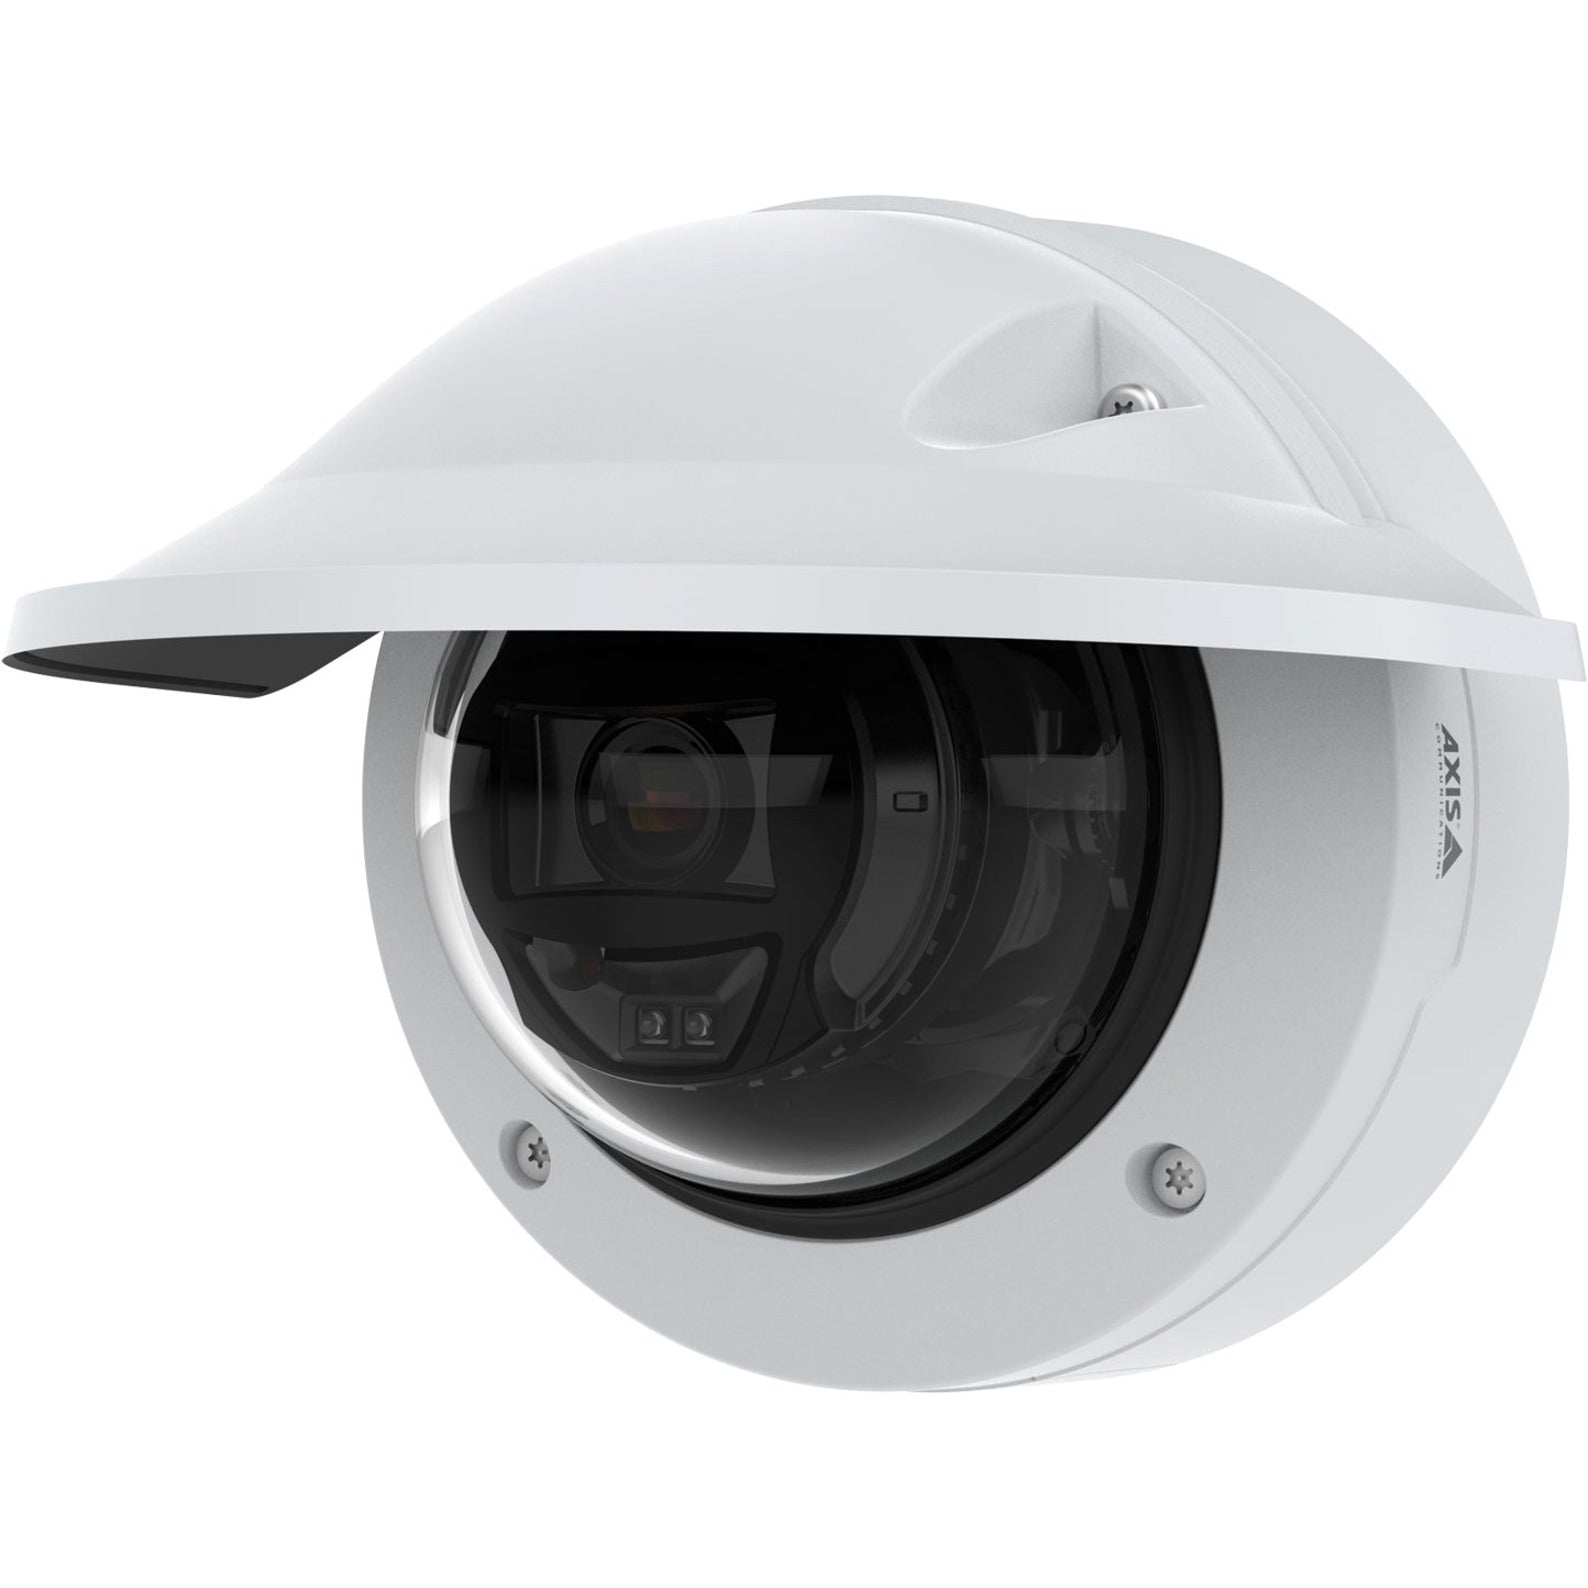 AXIS 02328-001 P3265-LVE Dome Camera, 2MP, Varifocal Lens, Full HD, Outdoor, Infrared Night Vision